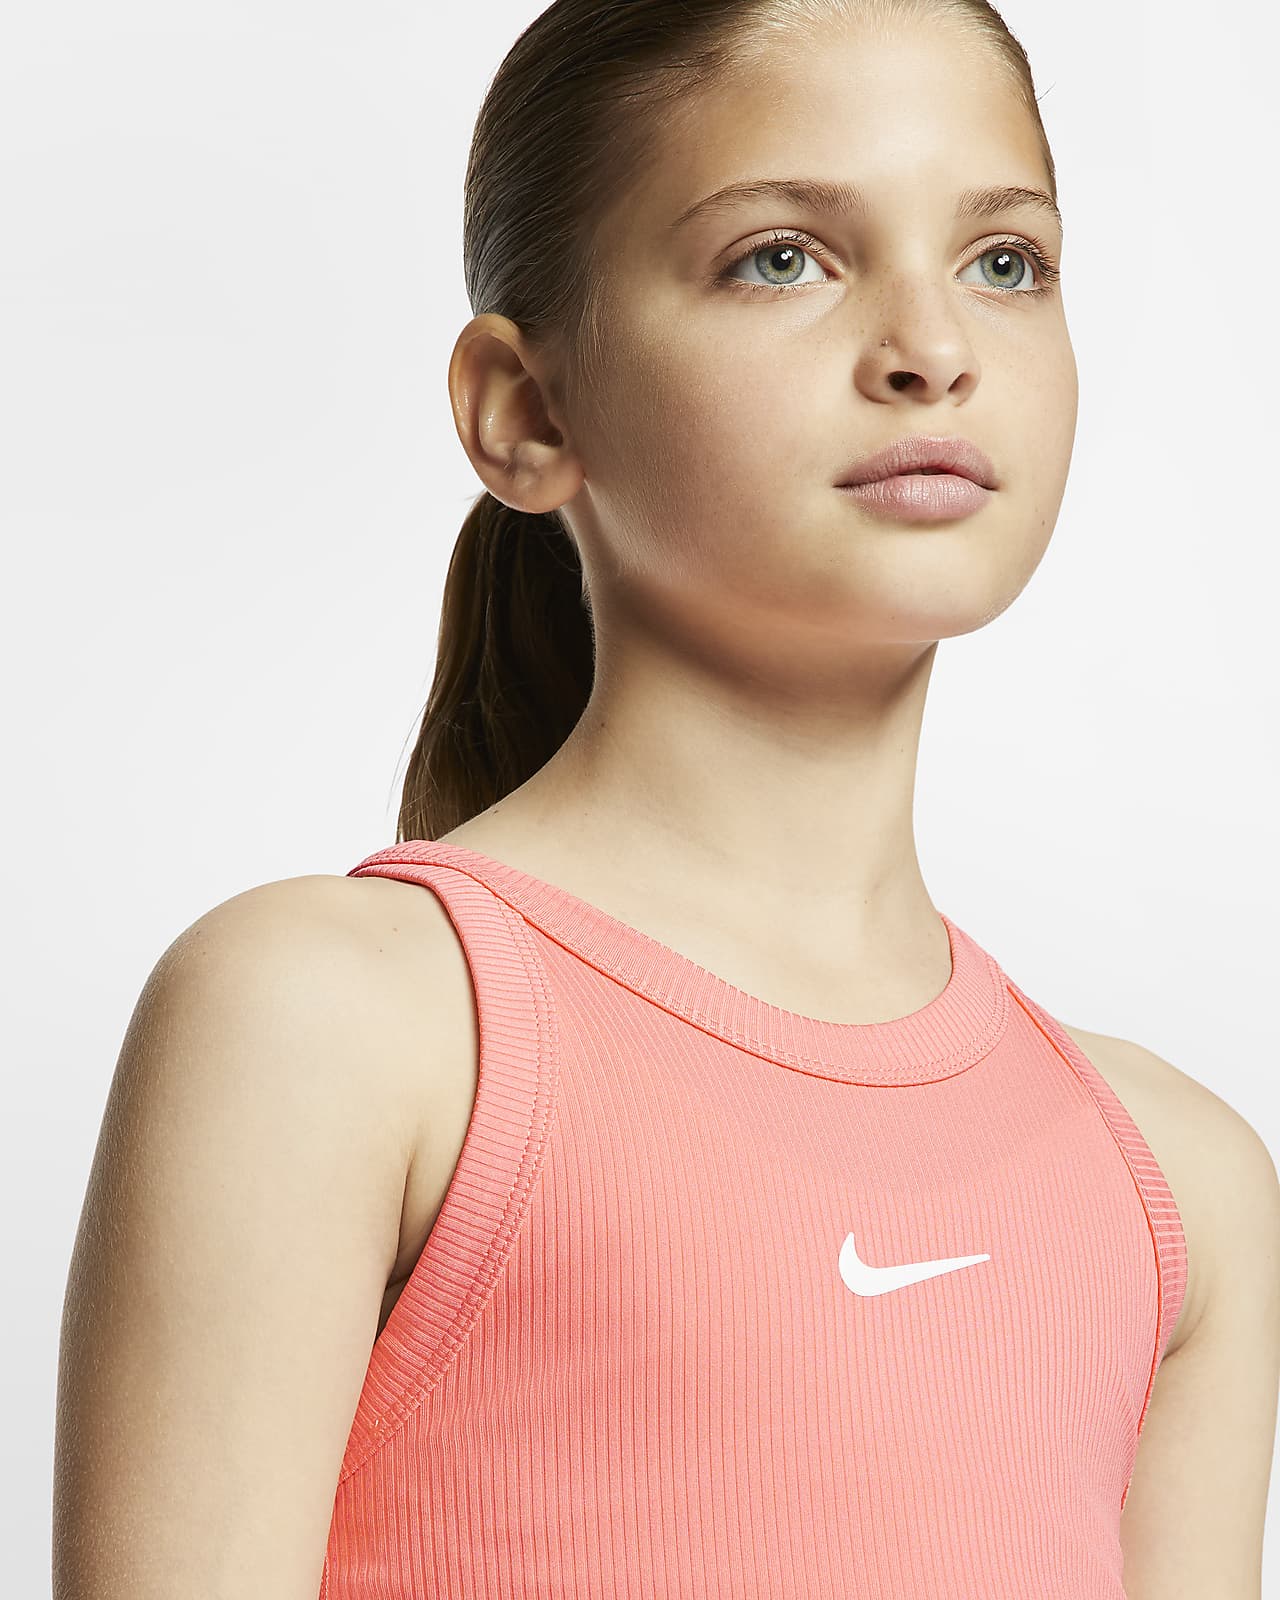 fitted nike dress